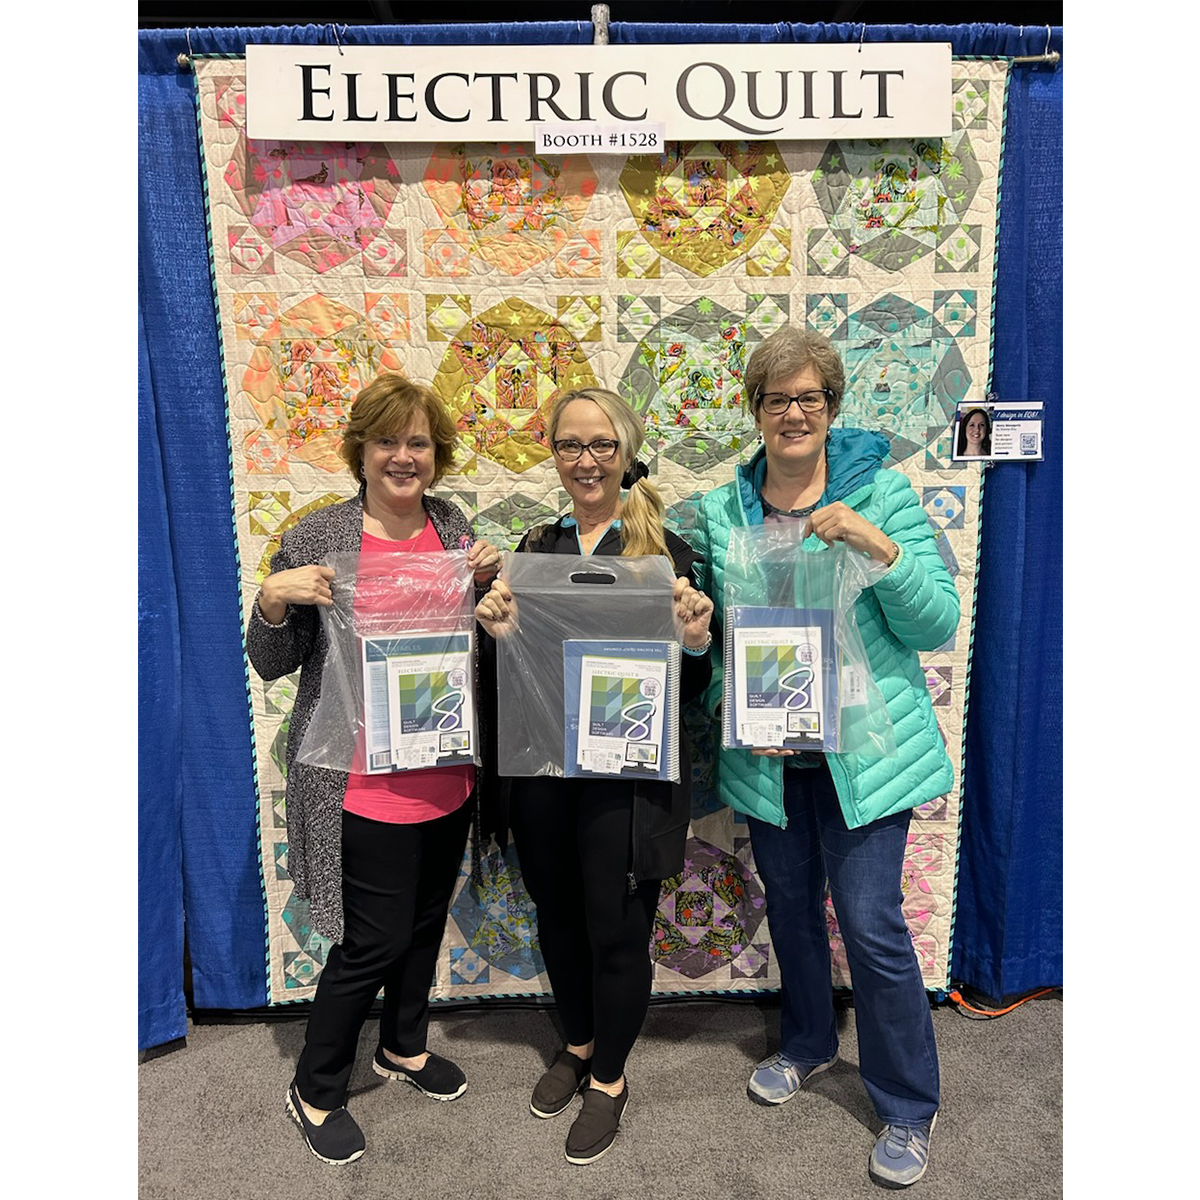 Thanks for stopping by the EQ booth!  We hope you had a wonderful time at AQS QuiltWeek Grand Rapids. We were so excited to be part of this show and are so happy we got to meet you! You are receiving this email because you provided your email address for one of our giveaways. Whether or not you took home a prize, we still have more to offer!